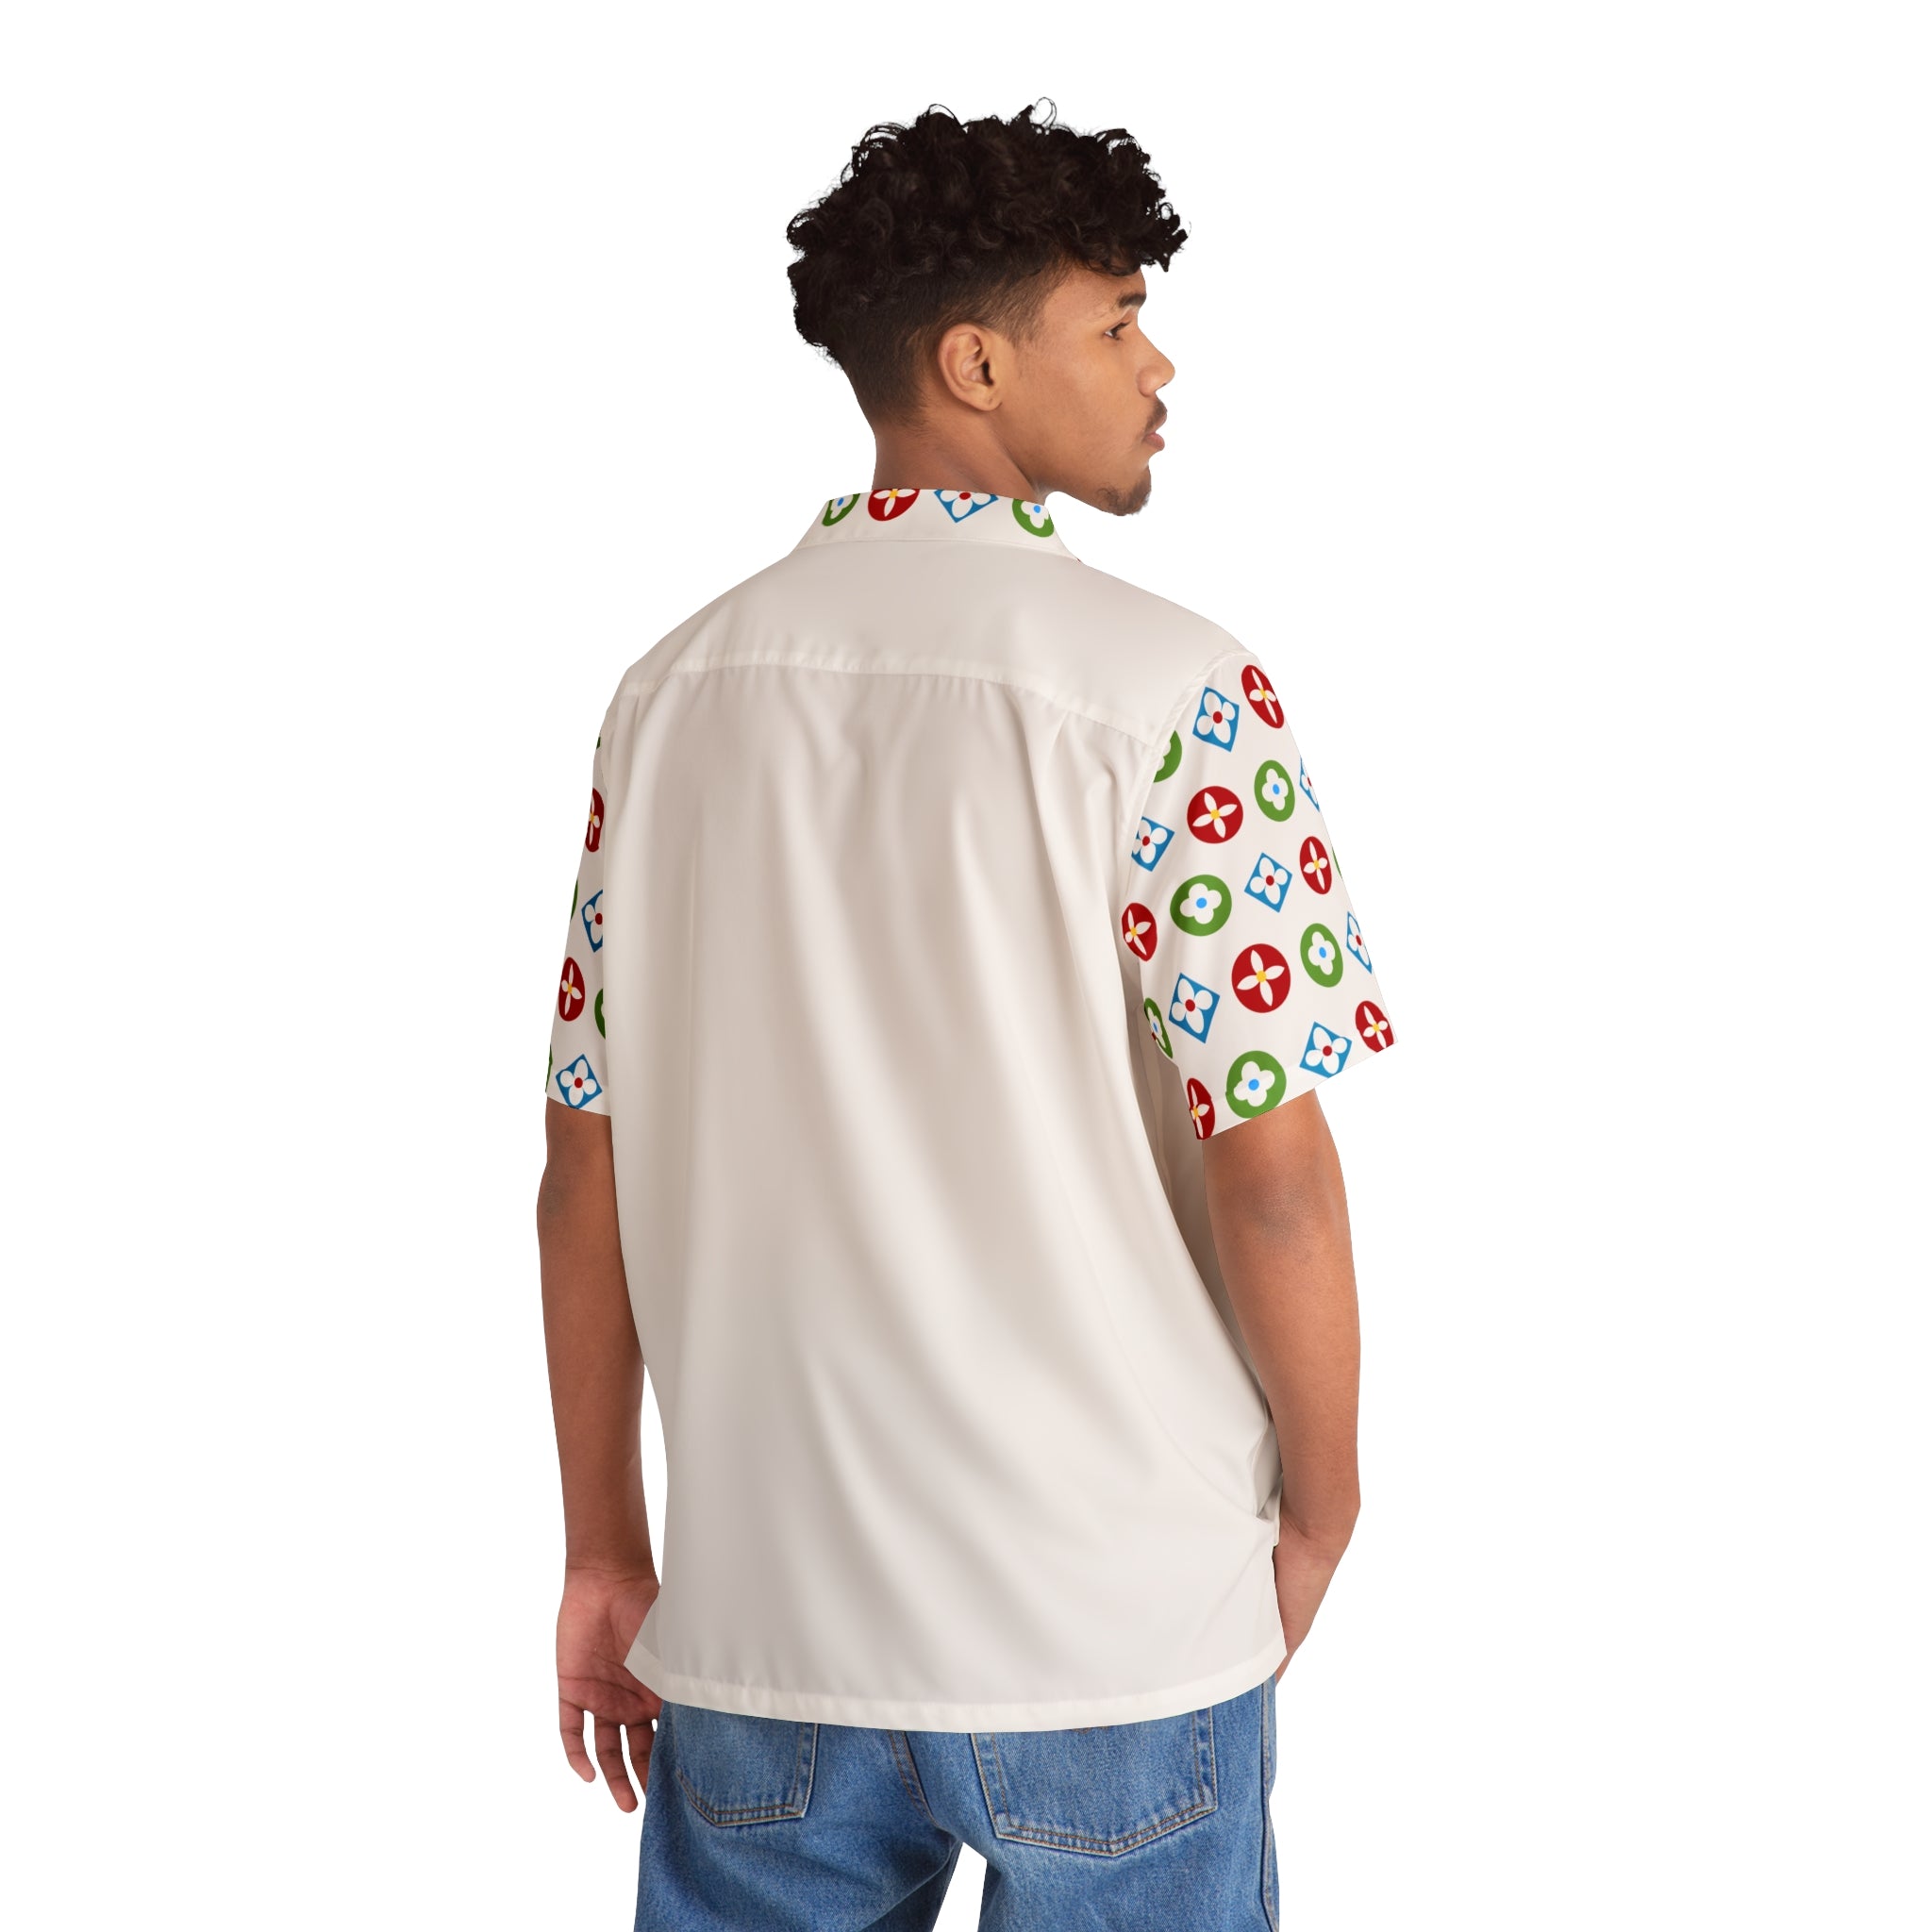 Groove Collection Trilogy of Icons Solid Block (Red, Green, Blue) White Unisex Gender Neutral Button Up Shirt, Hawaiian Shirt